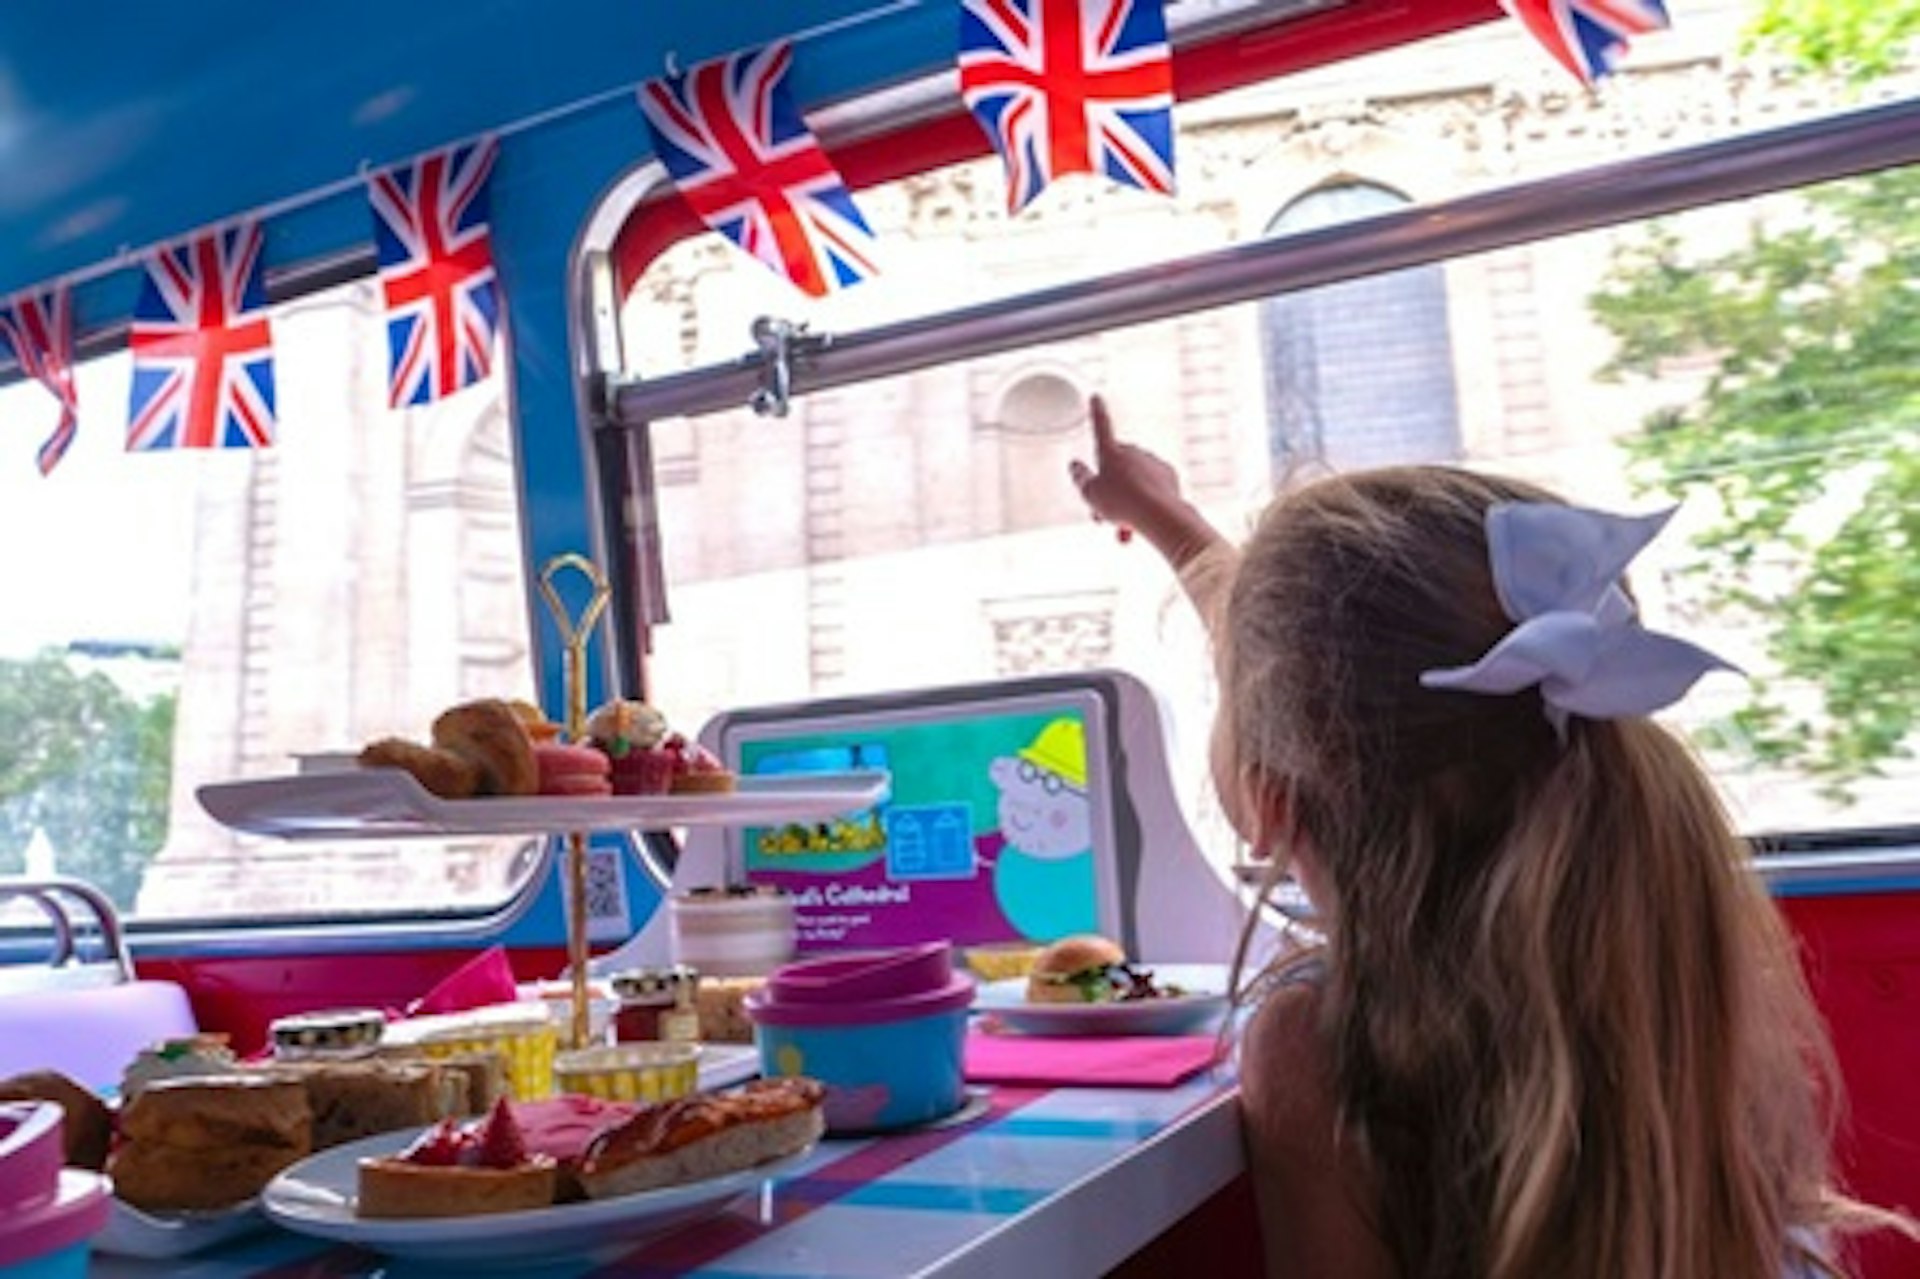 Peppa Pig Afternoon Tea Bus Tour for One Adult and One Child 4